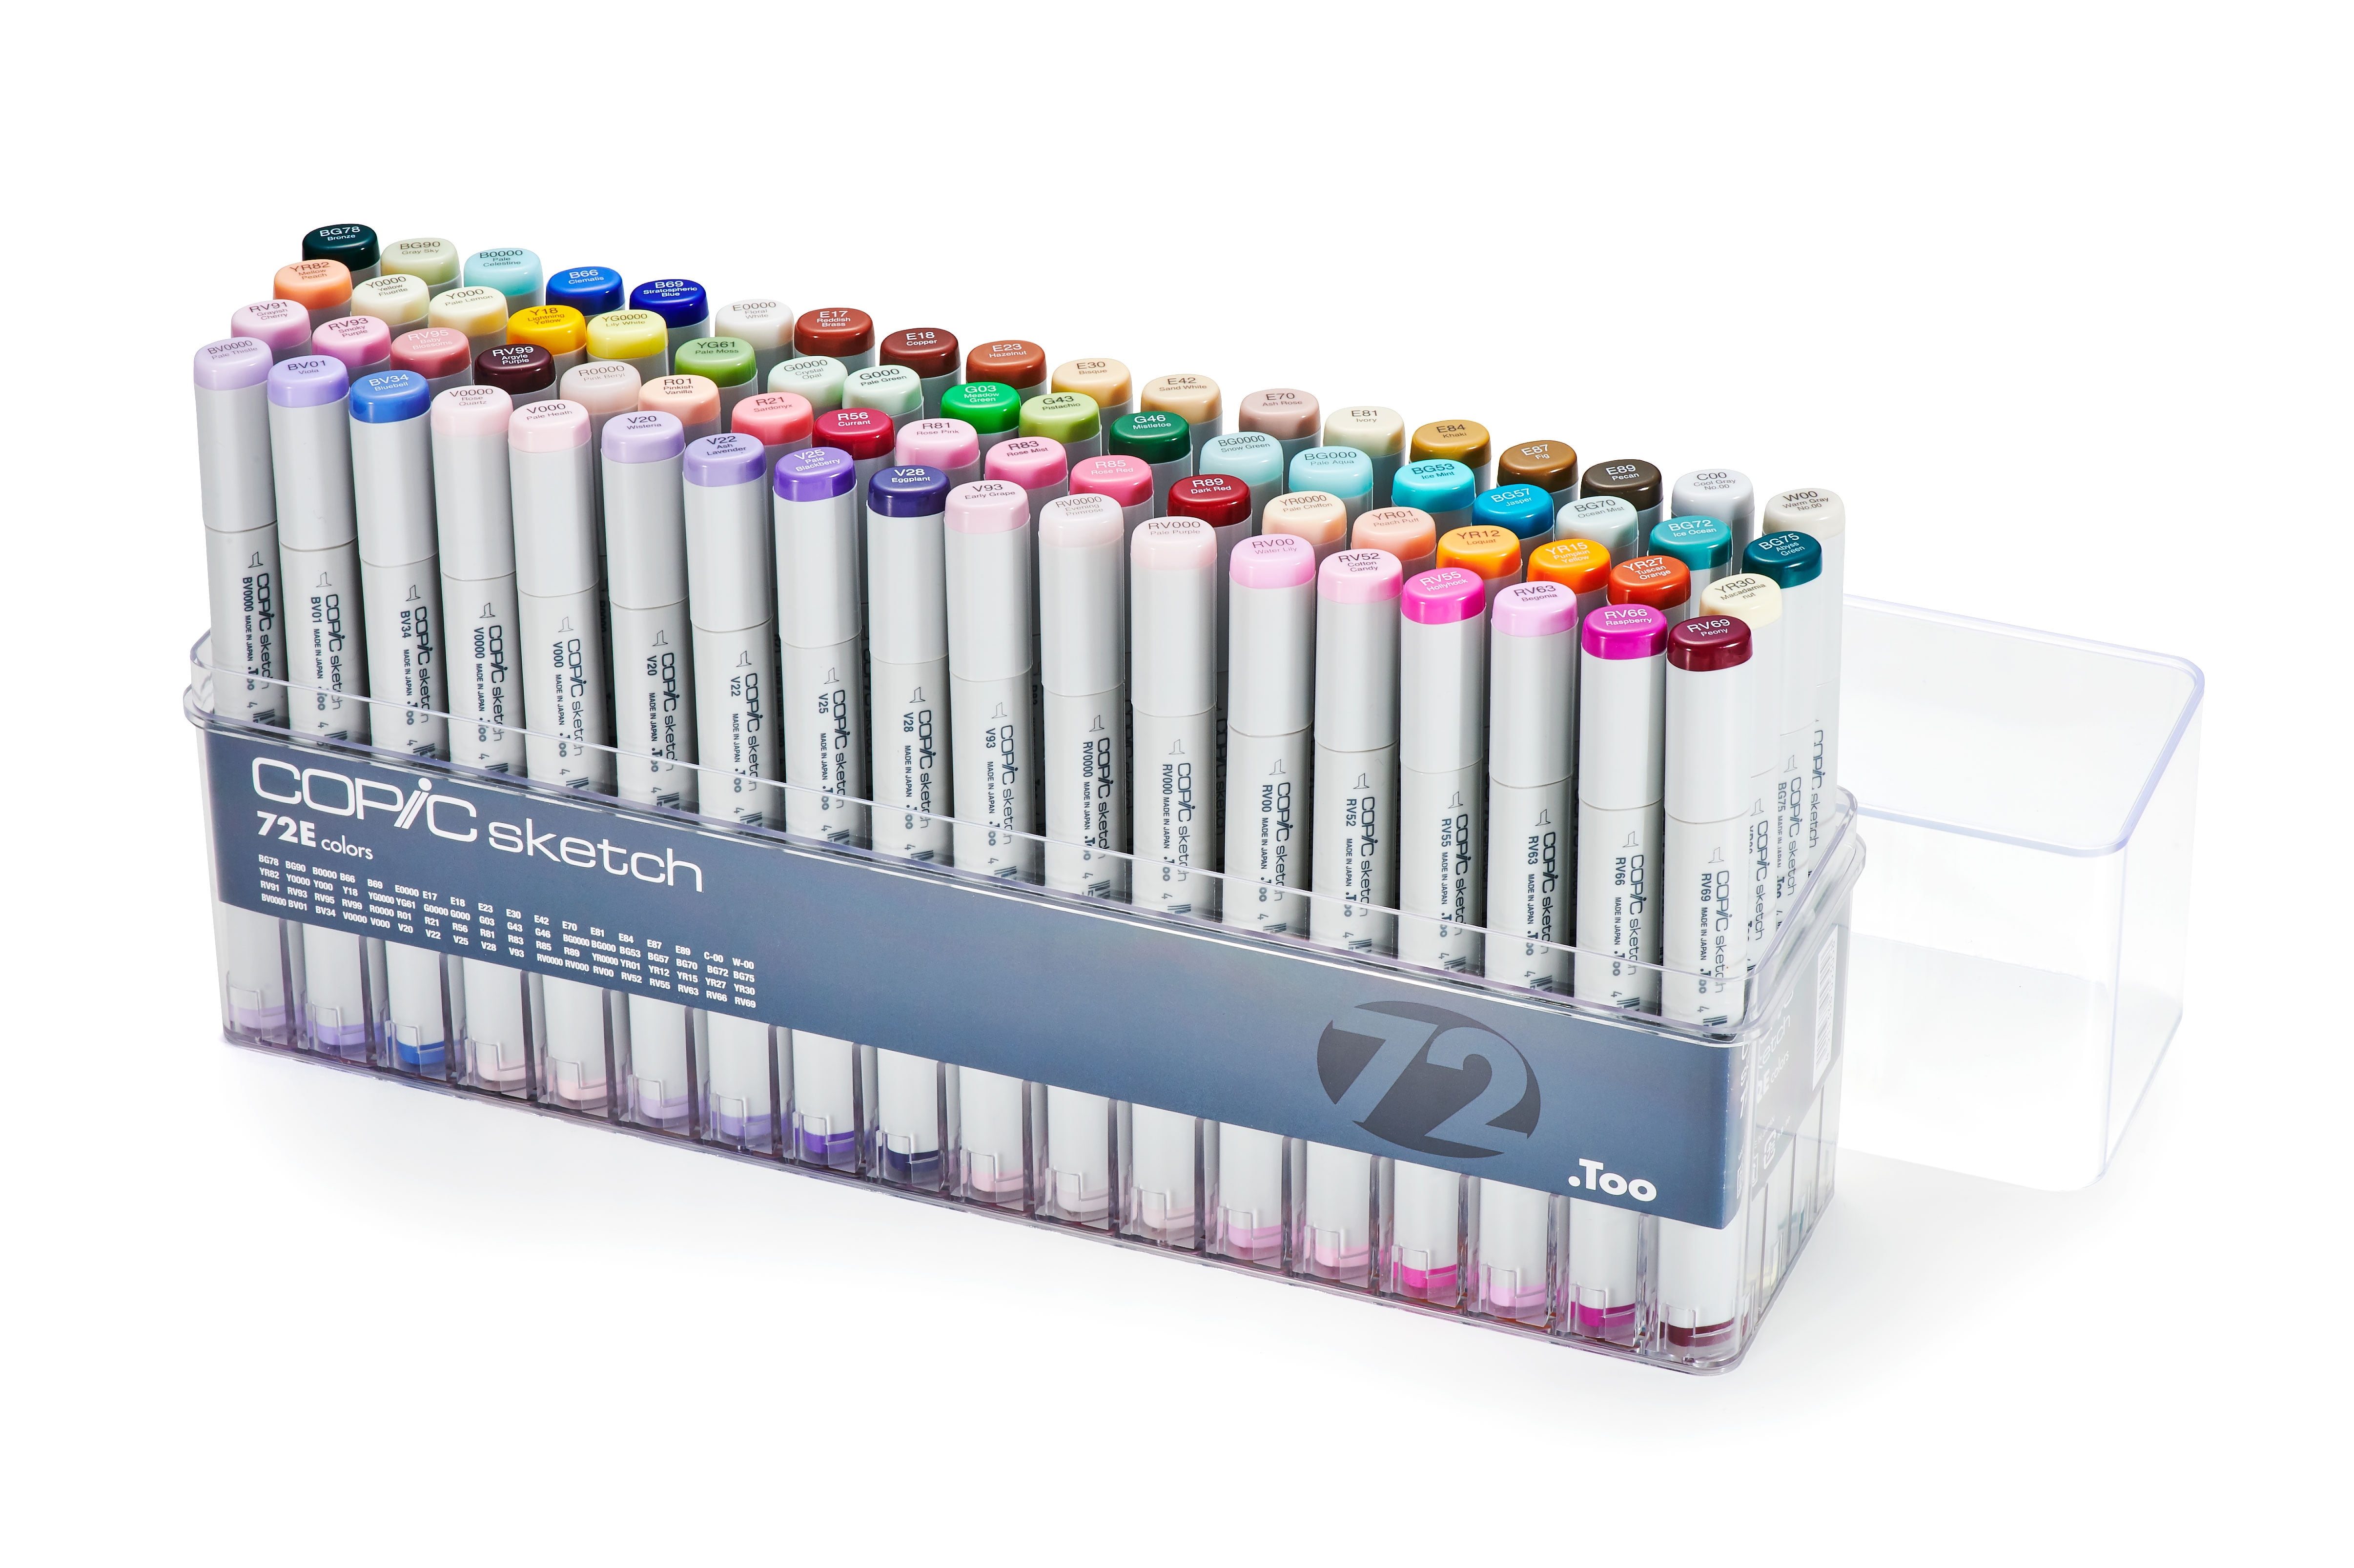 Copic Ciao Marker 12 Piece BasicCopic 12 Piece Skin Tone Sets Available 